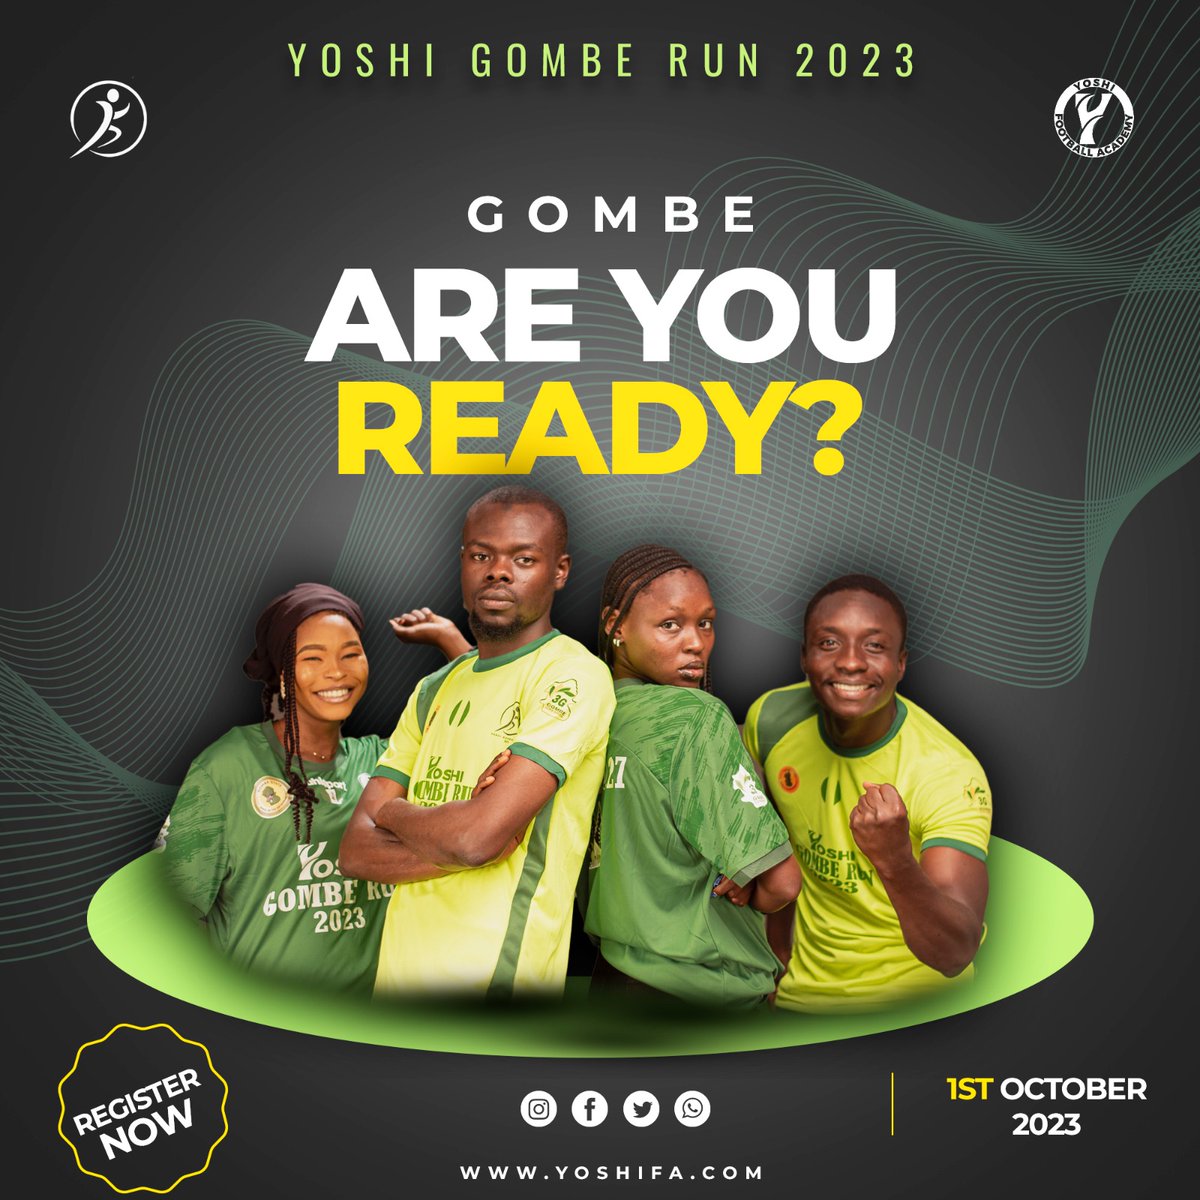 Embrace the thrill of Yoshi Gombe Run 2023!
Gombawa, it's time to put your running shoes on and conquer new horizons. Join us for a free run that is filled with camaraderie and achievement.

#GombeRun2023 #Gombawa #Gombe #gombestate #gombefacebookconnect #funrun